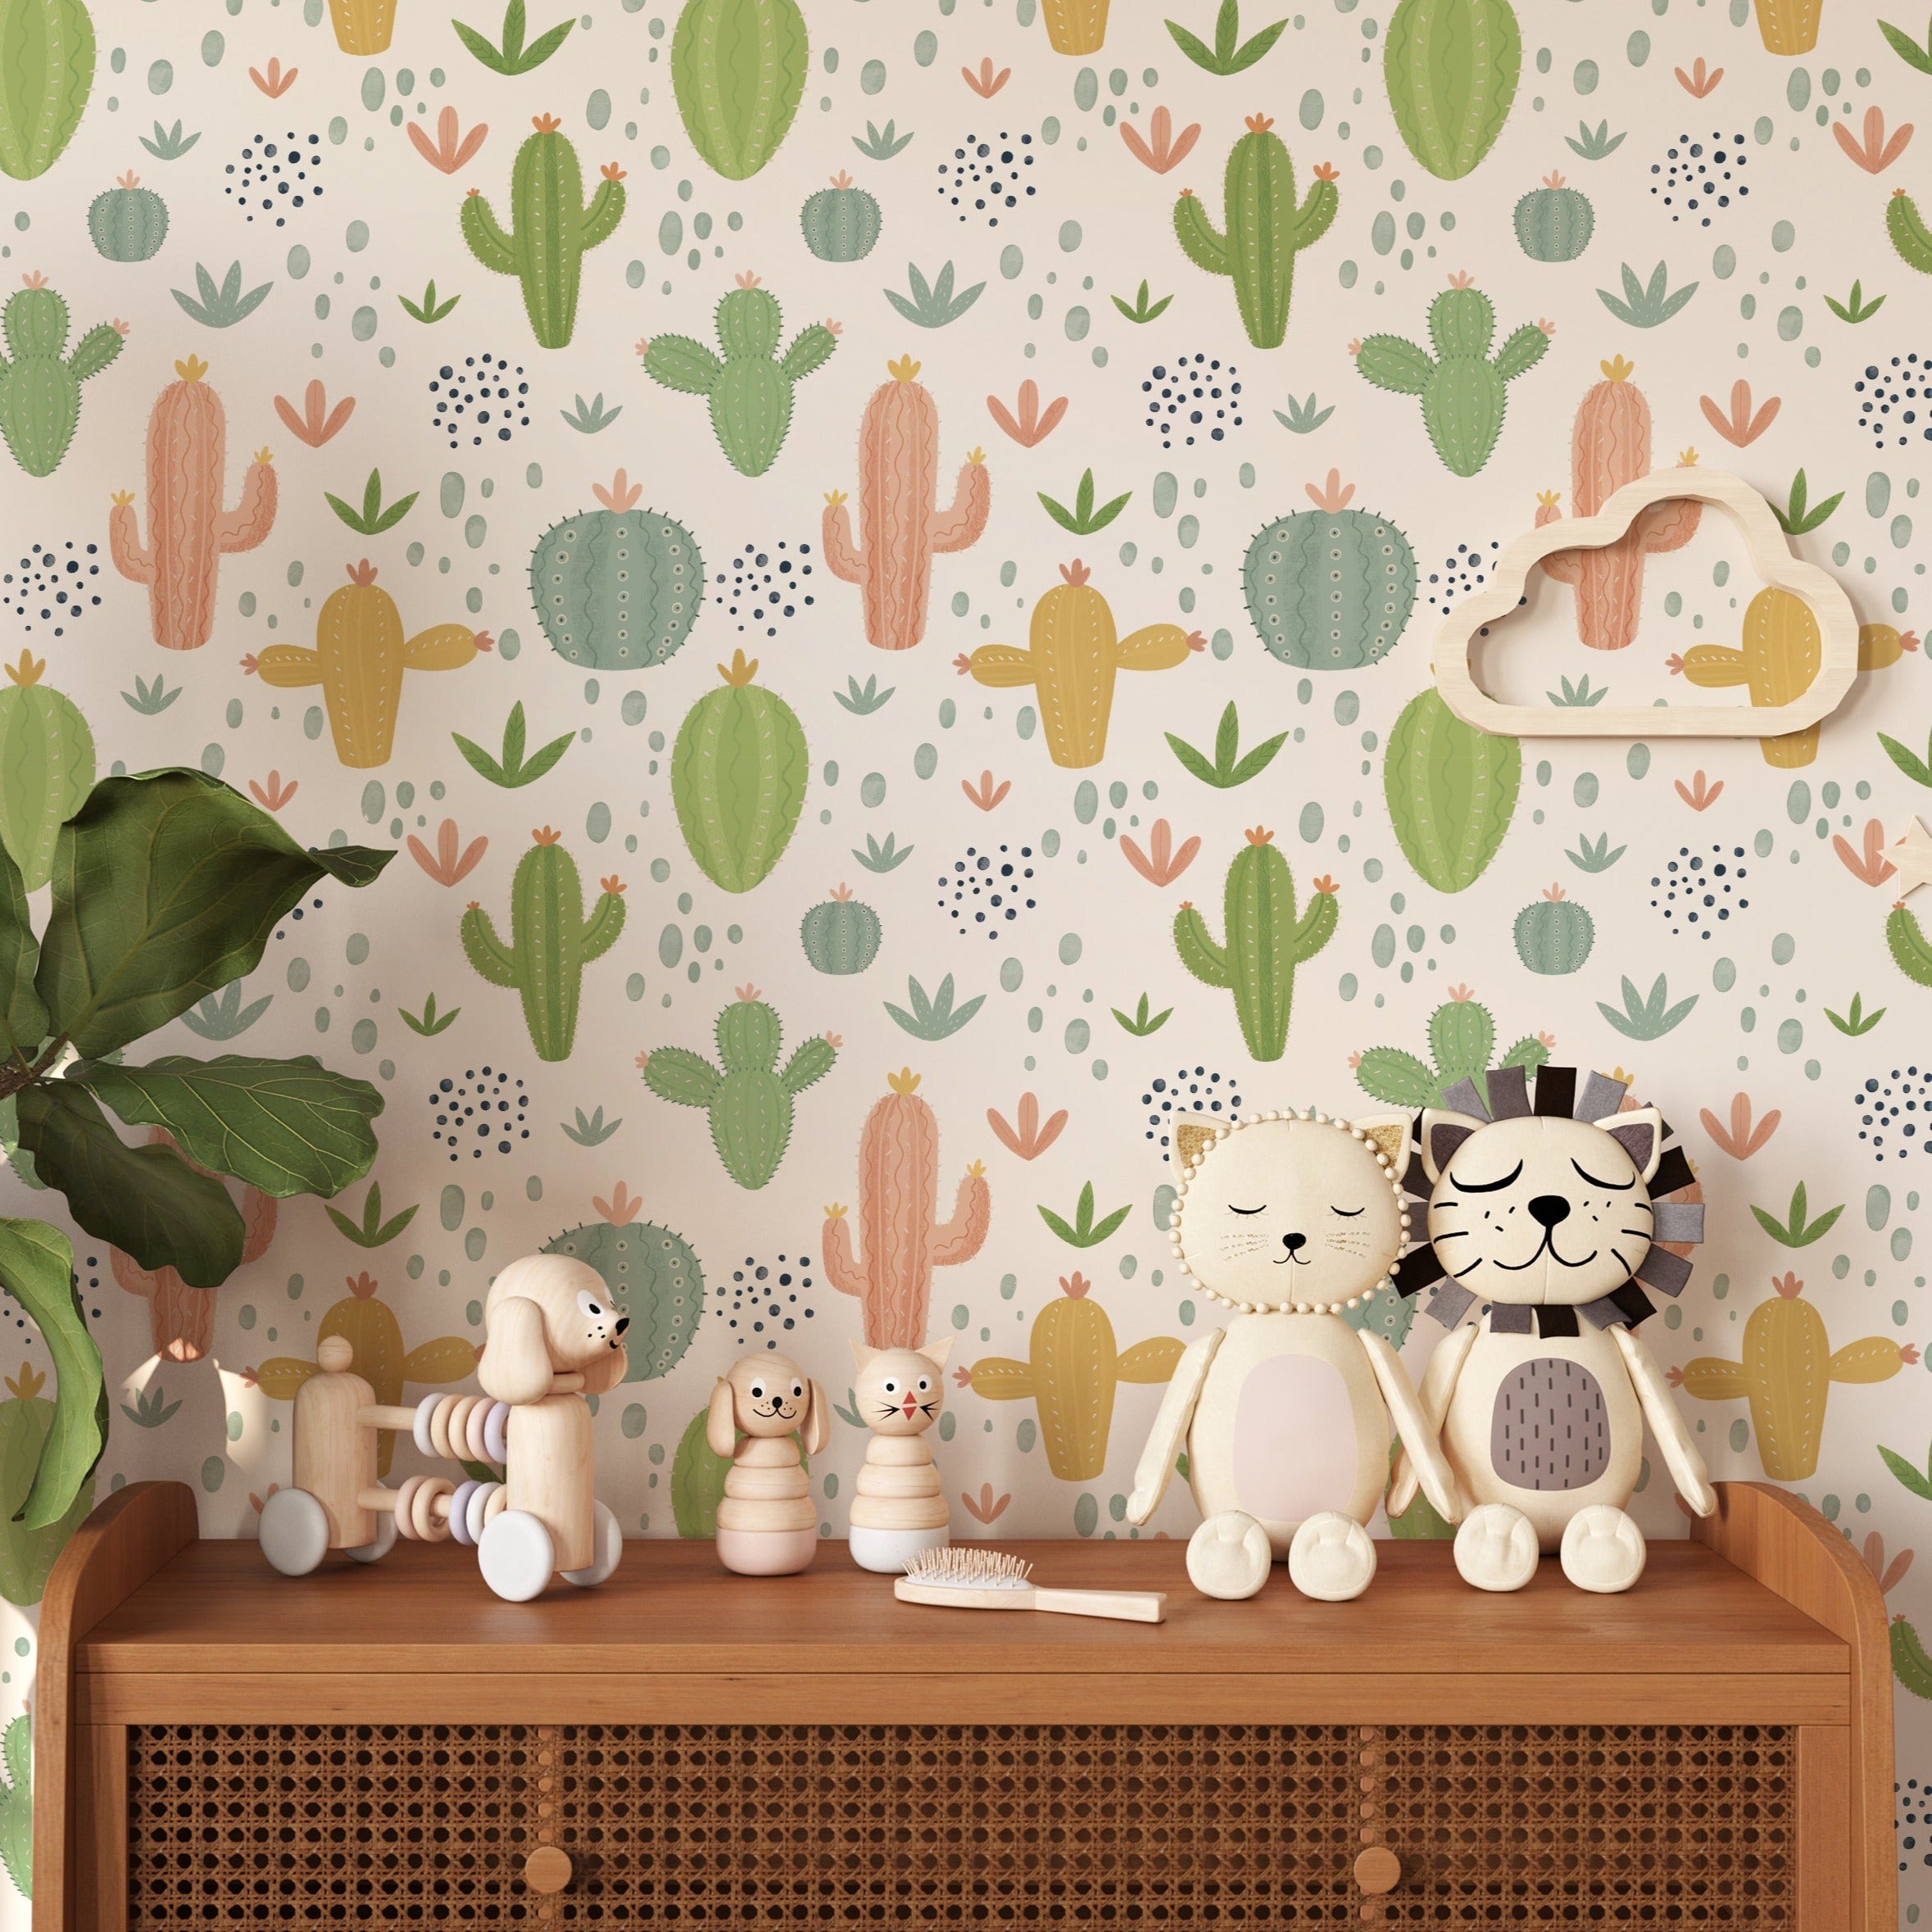 A vibrant children's room featuring walls adorned with 'Colourful Cactus Kids Wallpaper,' displaying various cacti in green and pastel hues alongside small orange and yellow flowers, complementing the playful and natural theme of the room